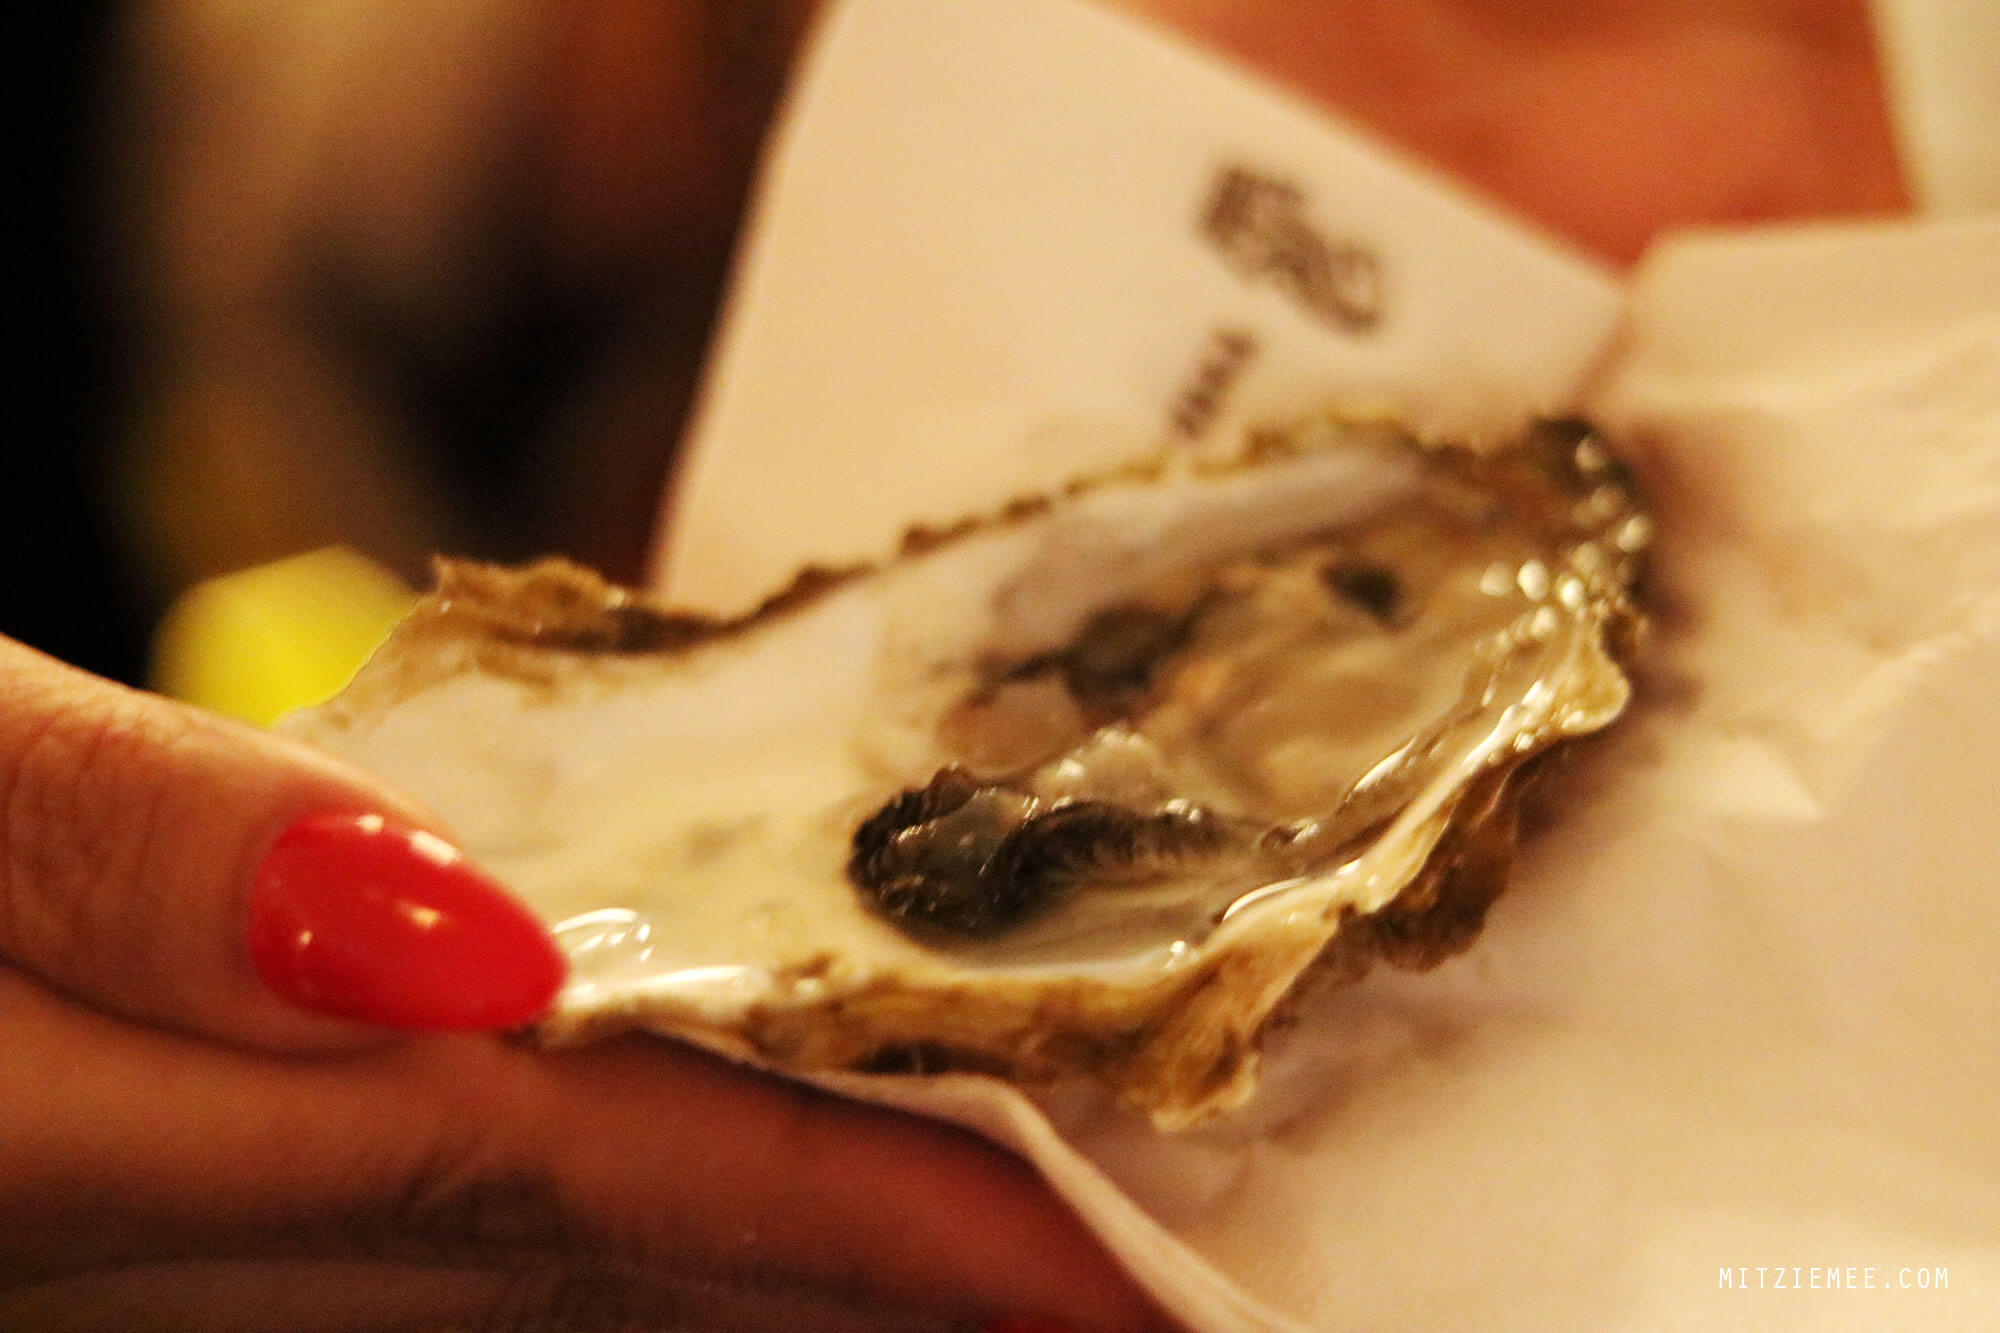 Ladies' night oysters